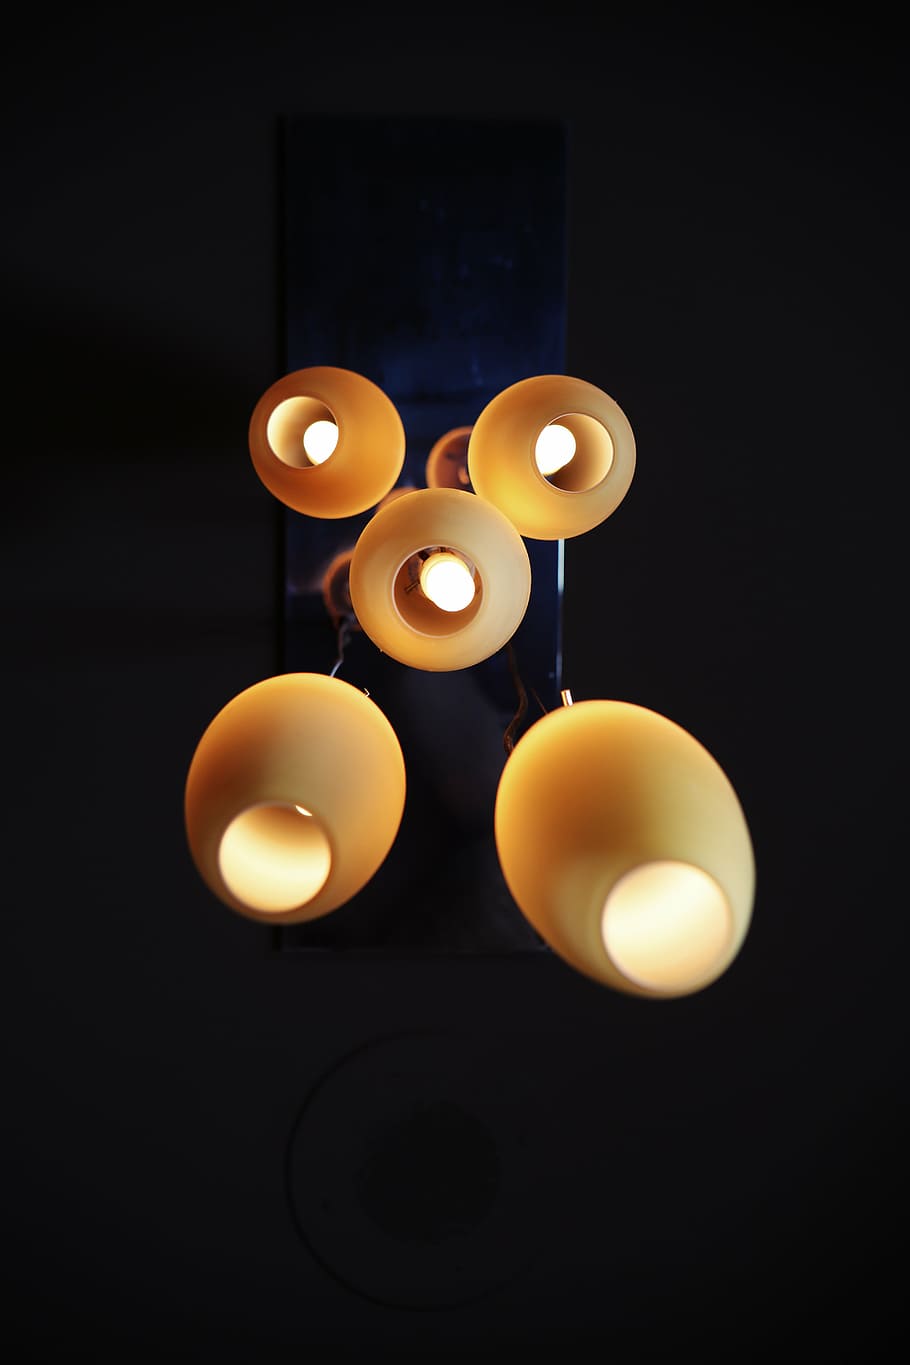 yellow lanterns, focus, photography, lighted, chandelier, lamps, lights, ceiling, dark, night